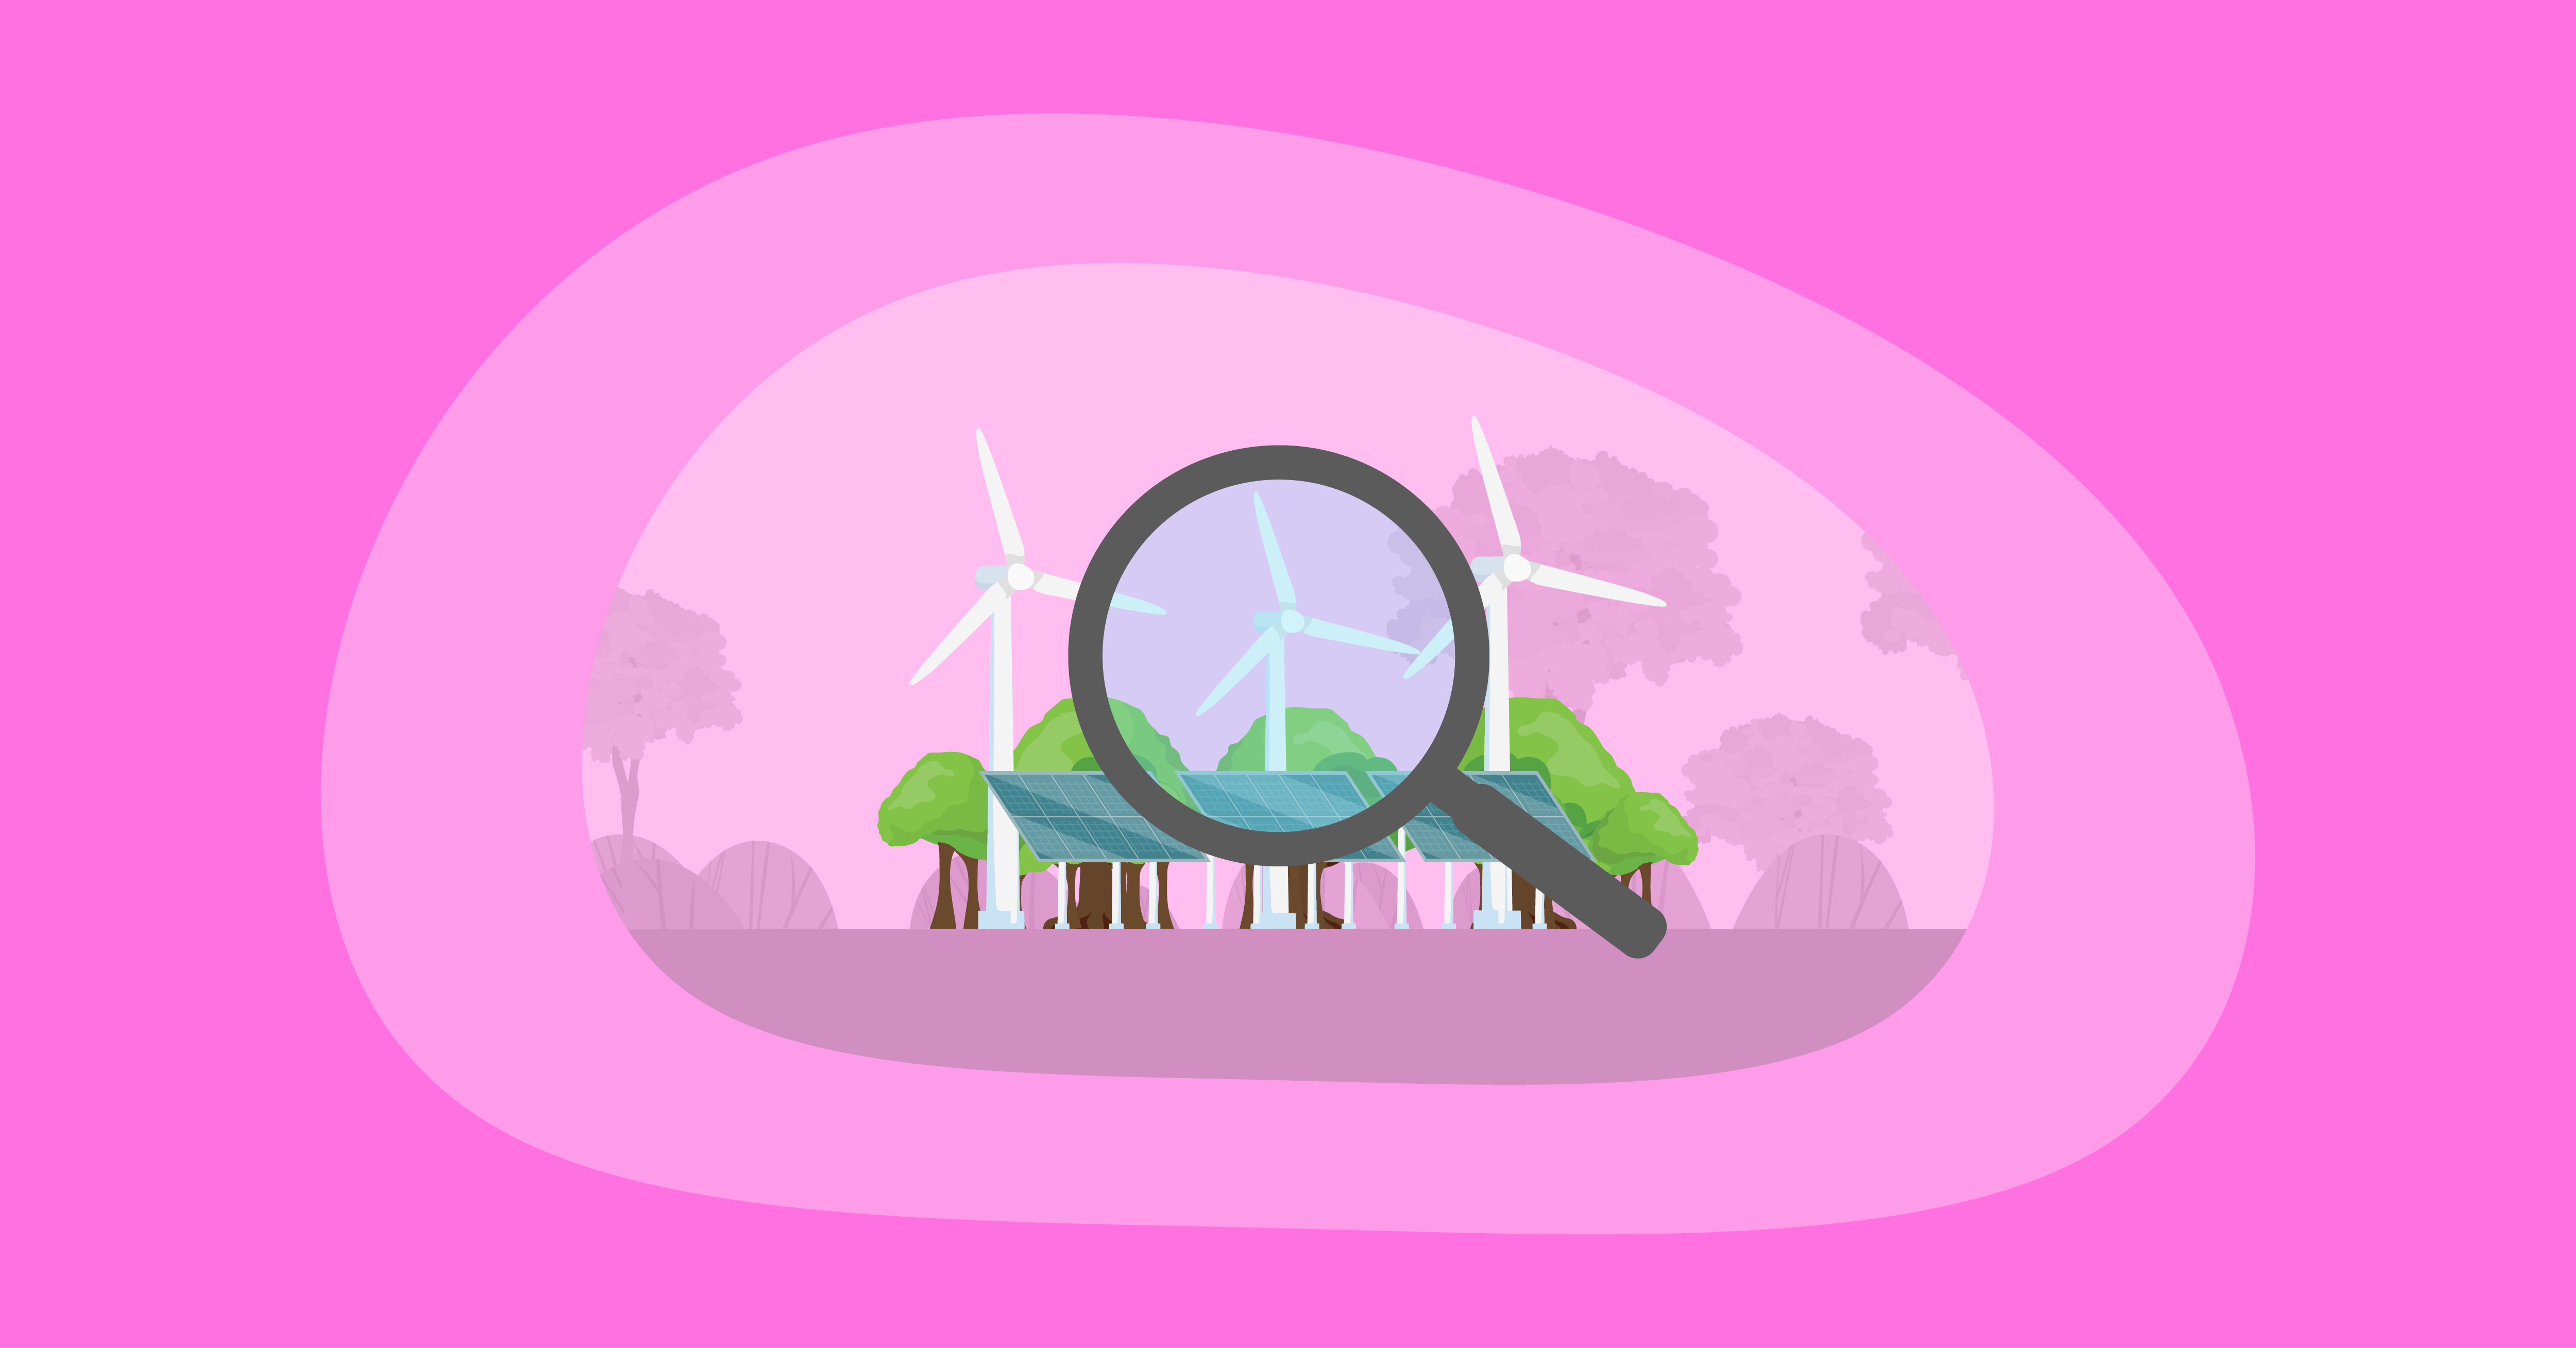 Attempted illustration of sustainable energy